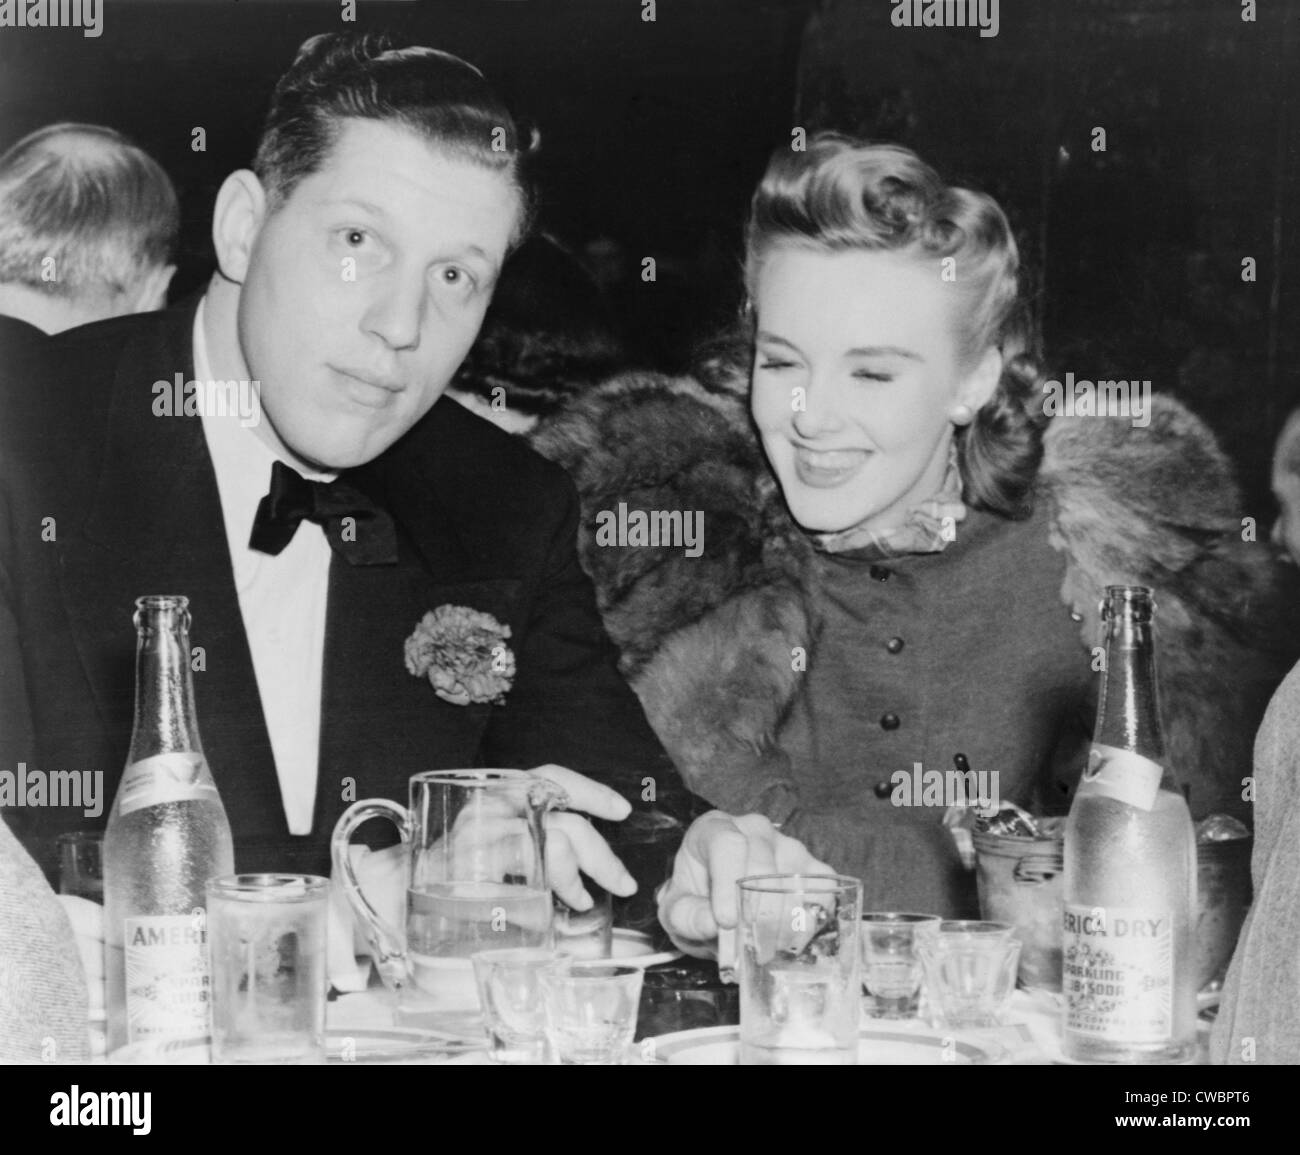 Alfred Bloomingdale (1916-1982), heir to the Bloomingdale's department store fortune, with Barbara Bradford at the Kit Kat Club Stock Photo